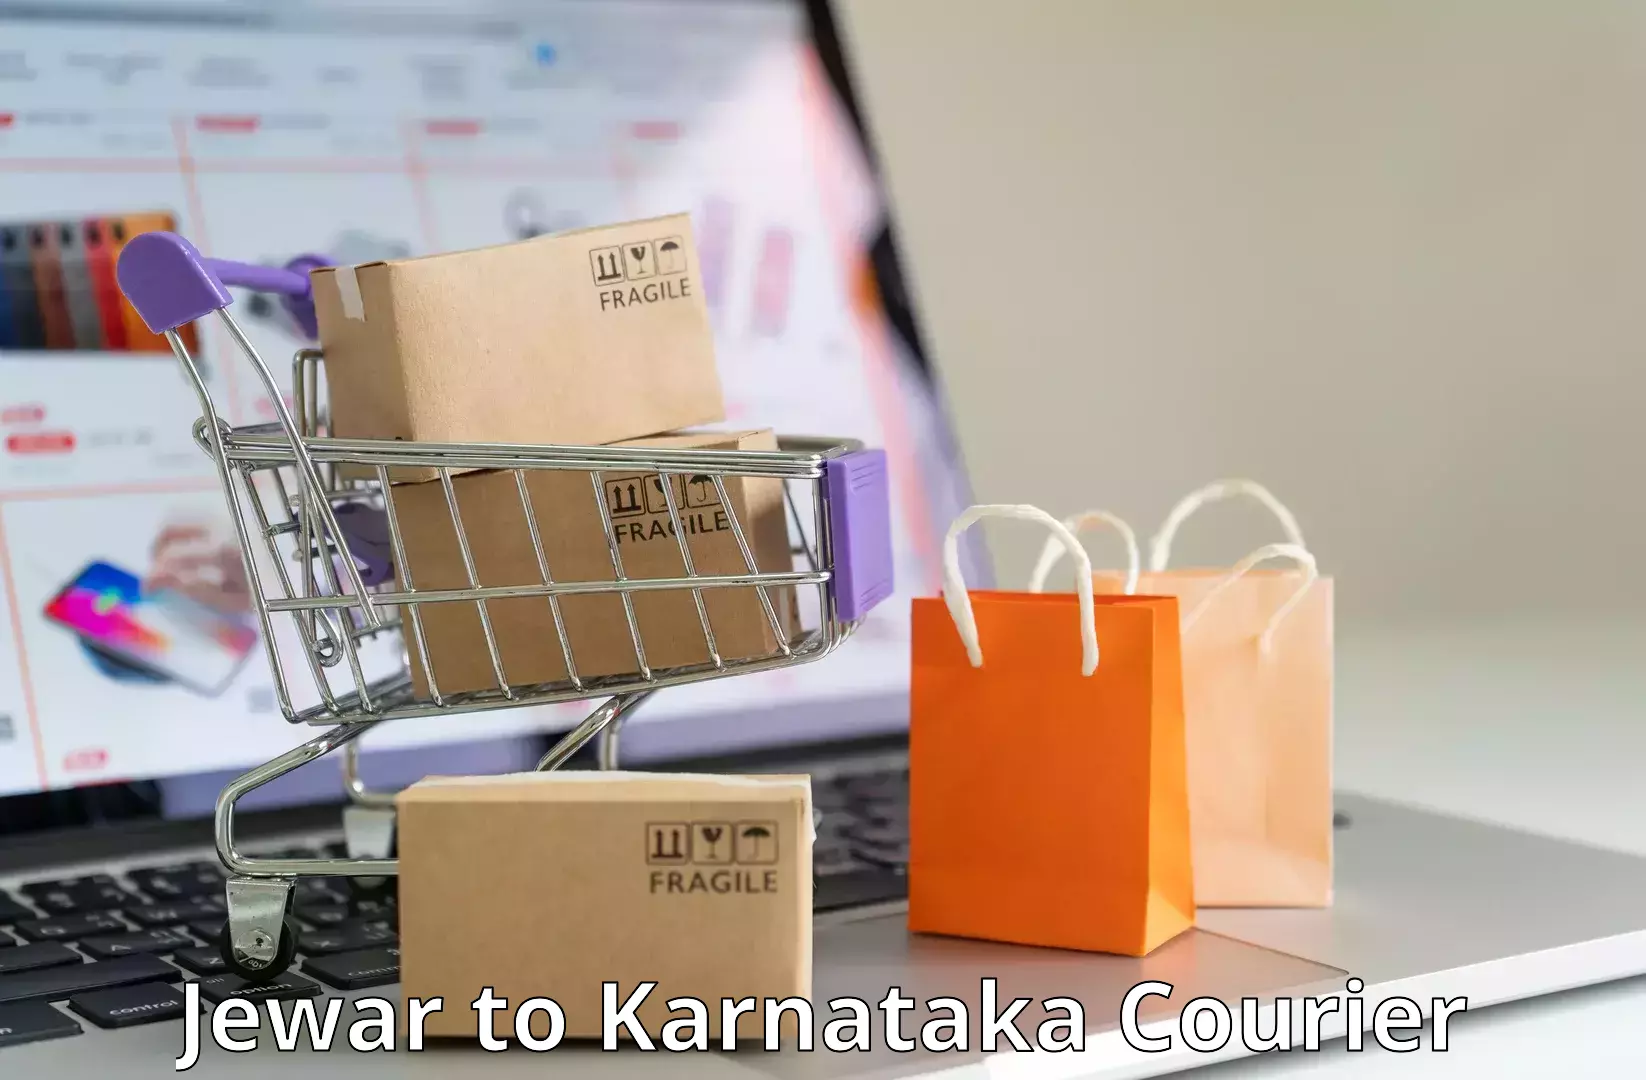 Easy access courier services Jewar to Mangalore